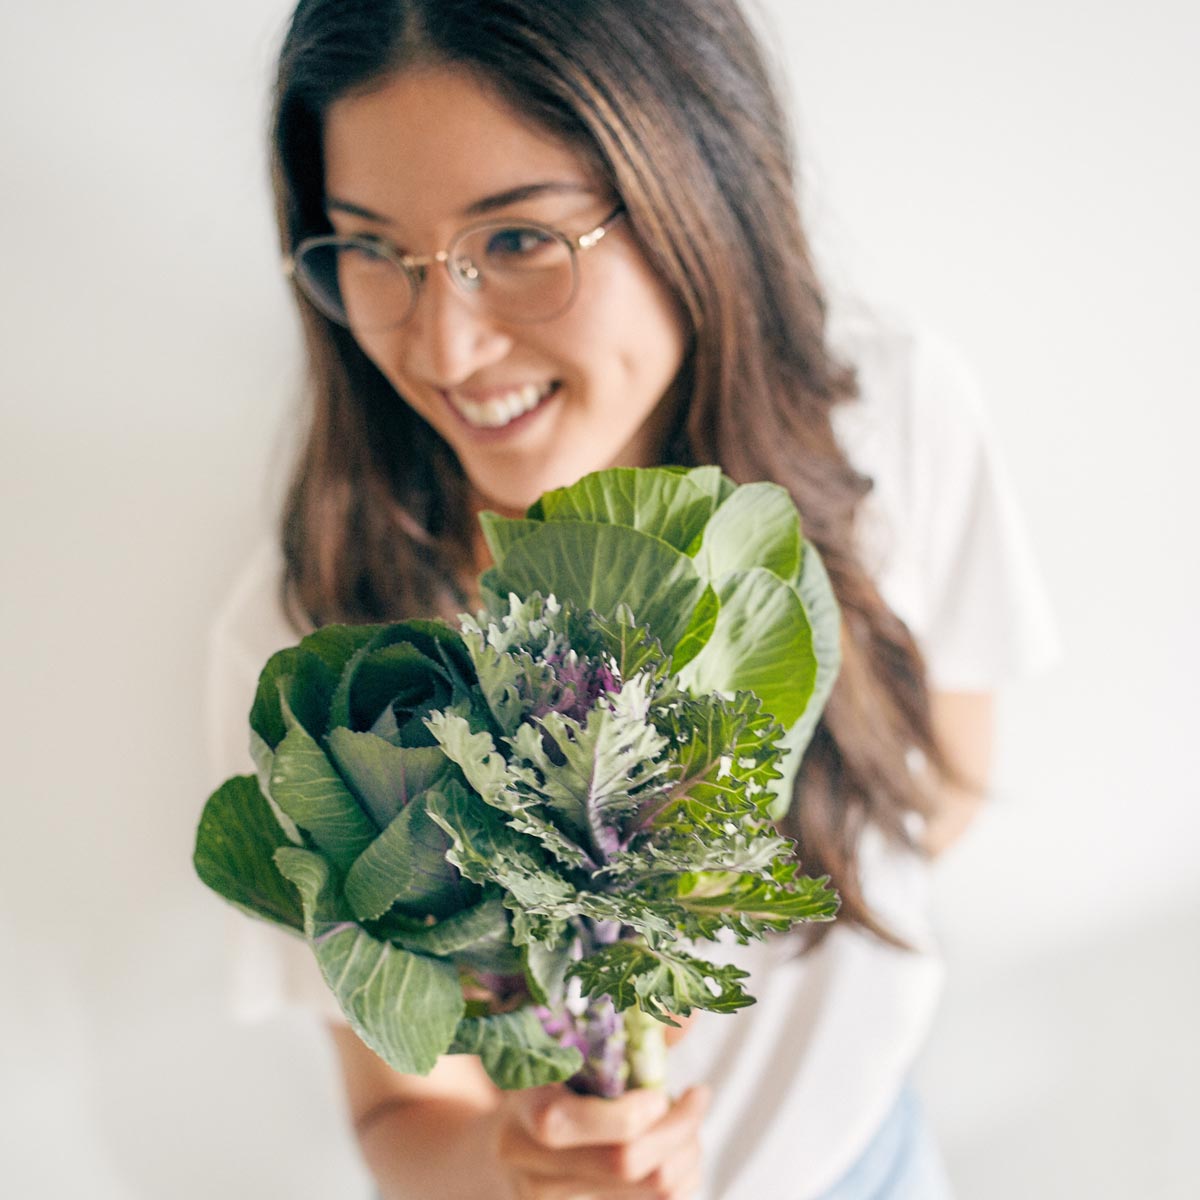 Brianne with kale